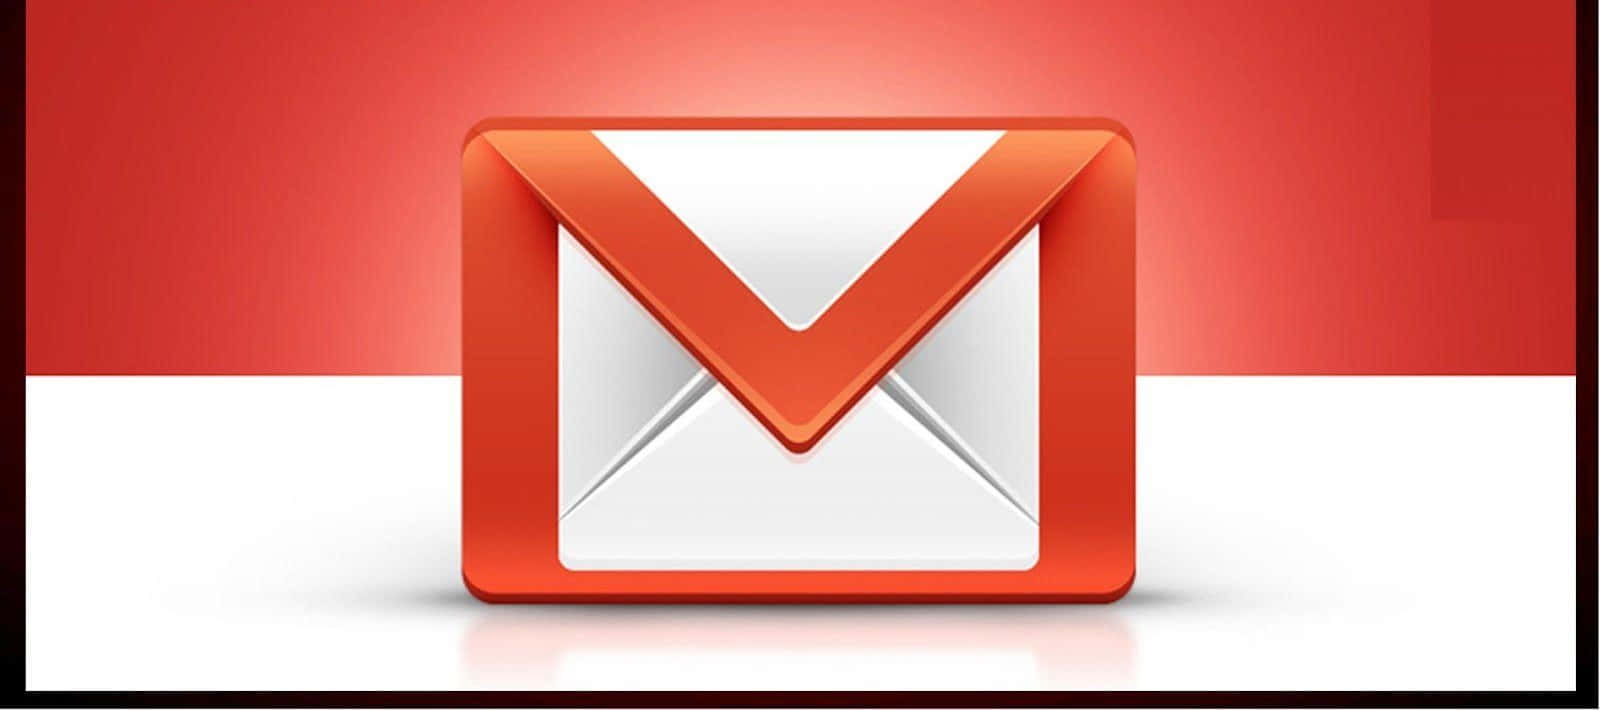 Enjoying the convenience of accessing the Gmail platform on any device